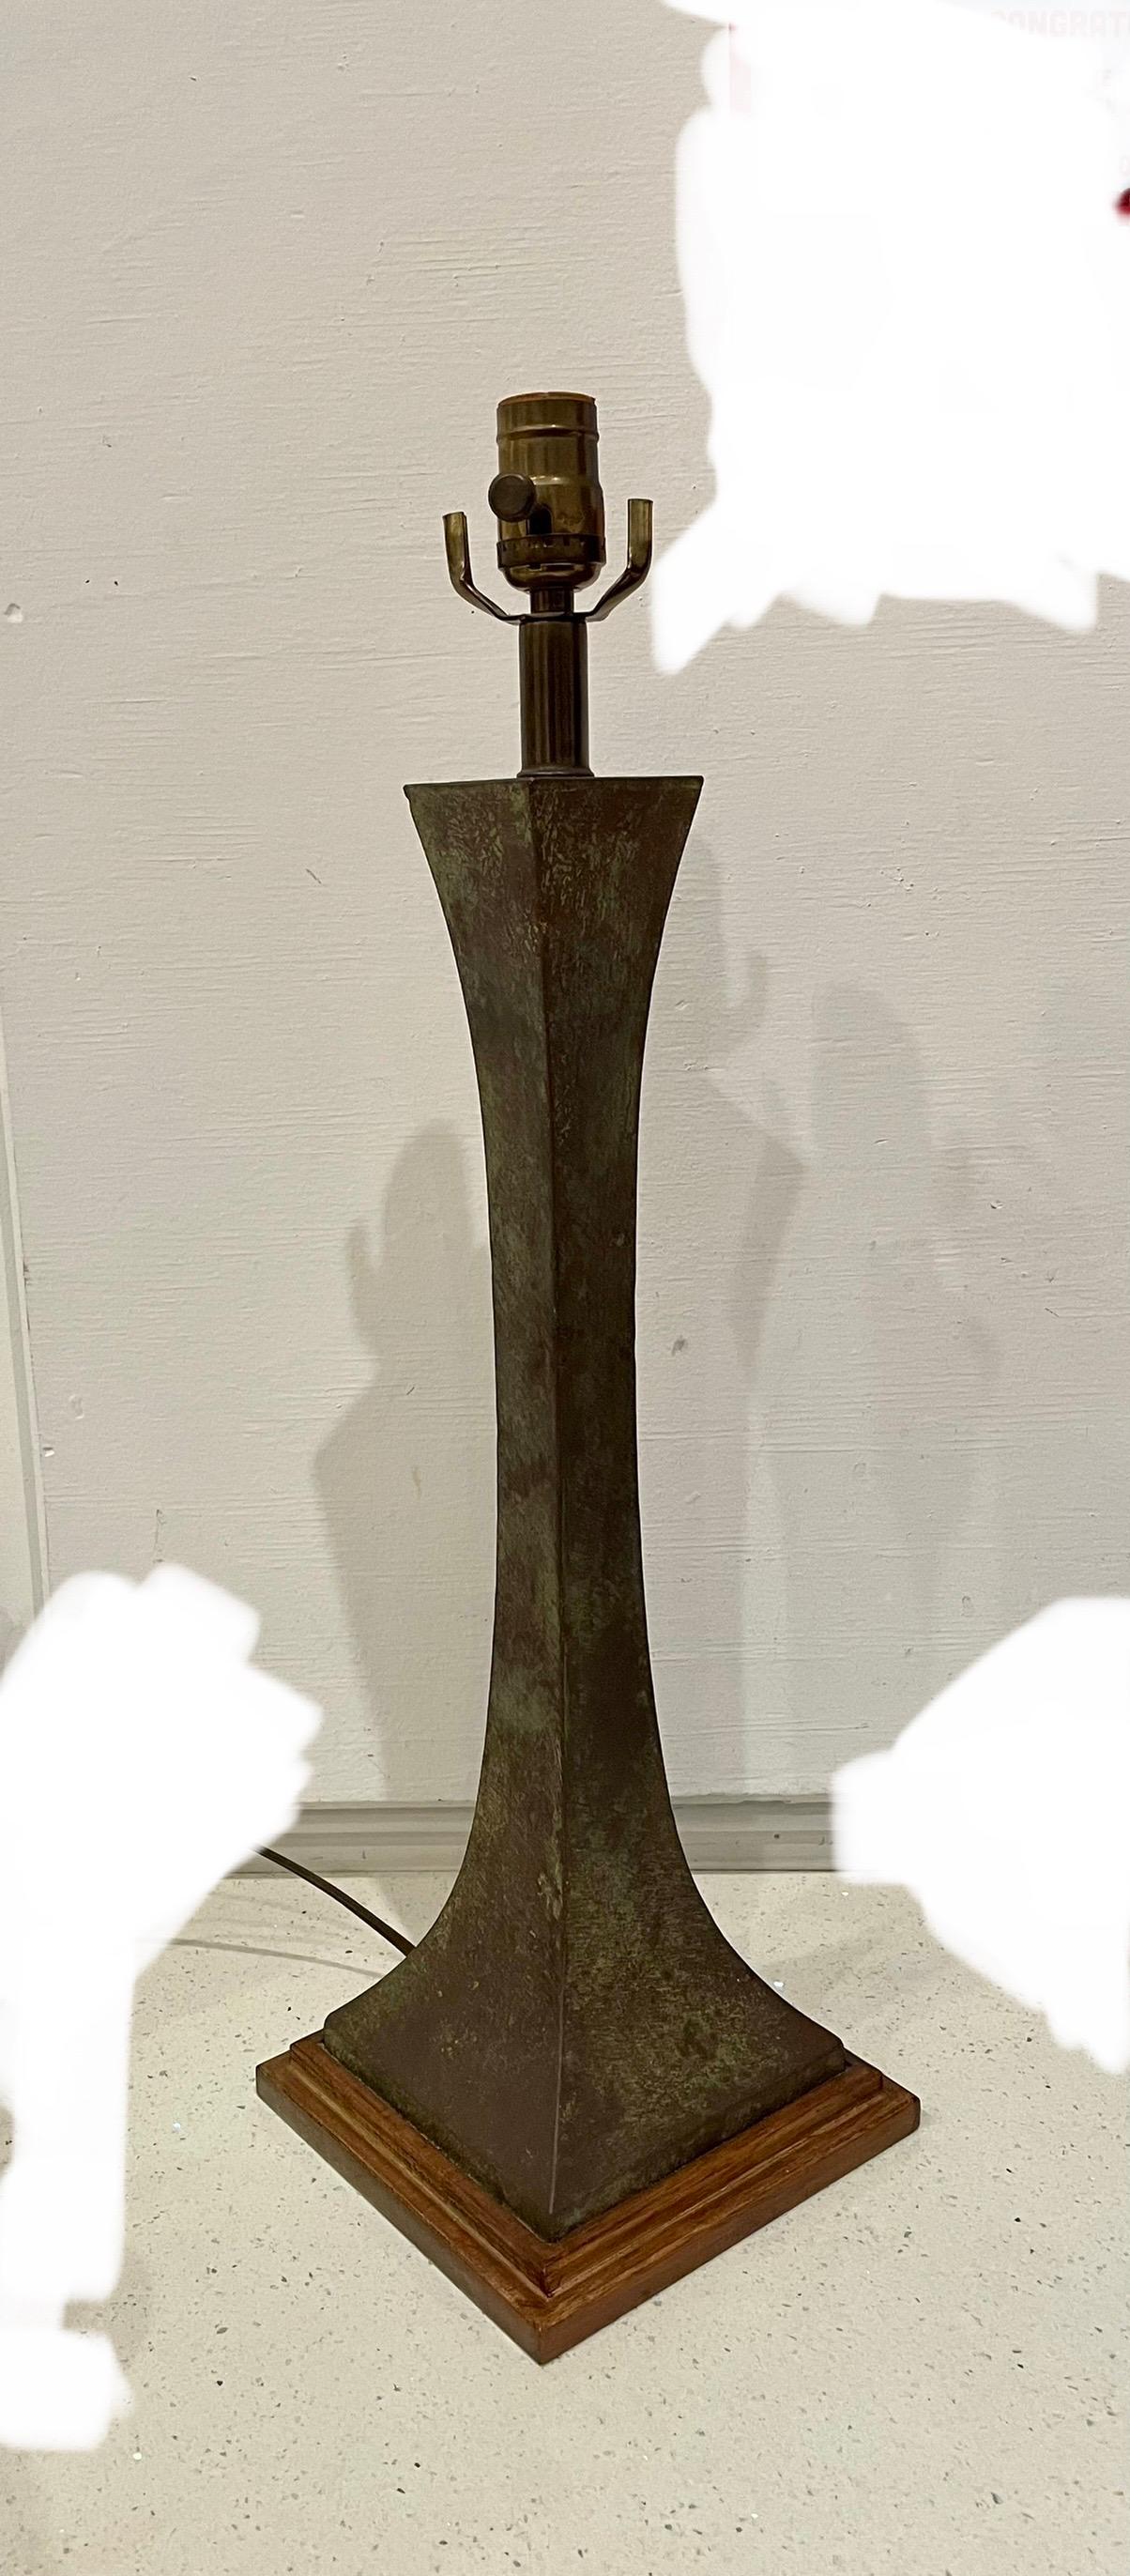 Exceptional Mid-Century Modern bronze Verdigris table lamp. Designed by Stewart Ross James and manufactured by Hansen Lighting, New York, USA, the 1960s. This lamp its sold without a lampshade nice original and working condition.